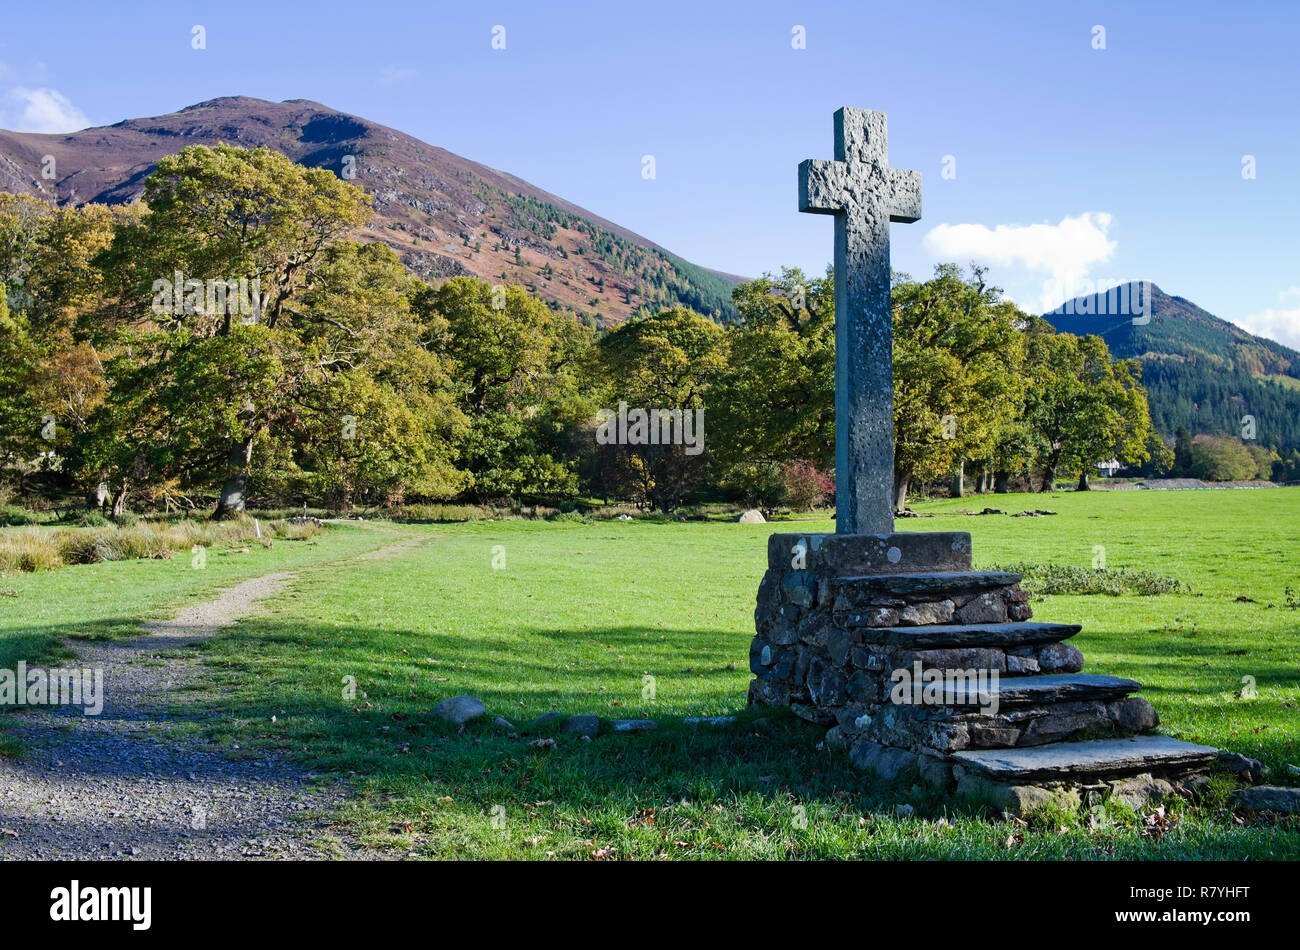 Old stone cross mounted on rustic stone steps in field by St Bega's Church, Bassenthwaite, Ullock Pike and Dodd rising behind, Lake District, Cumbria Stock Photo